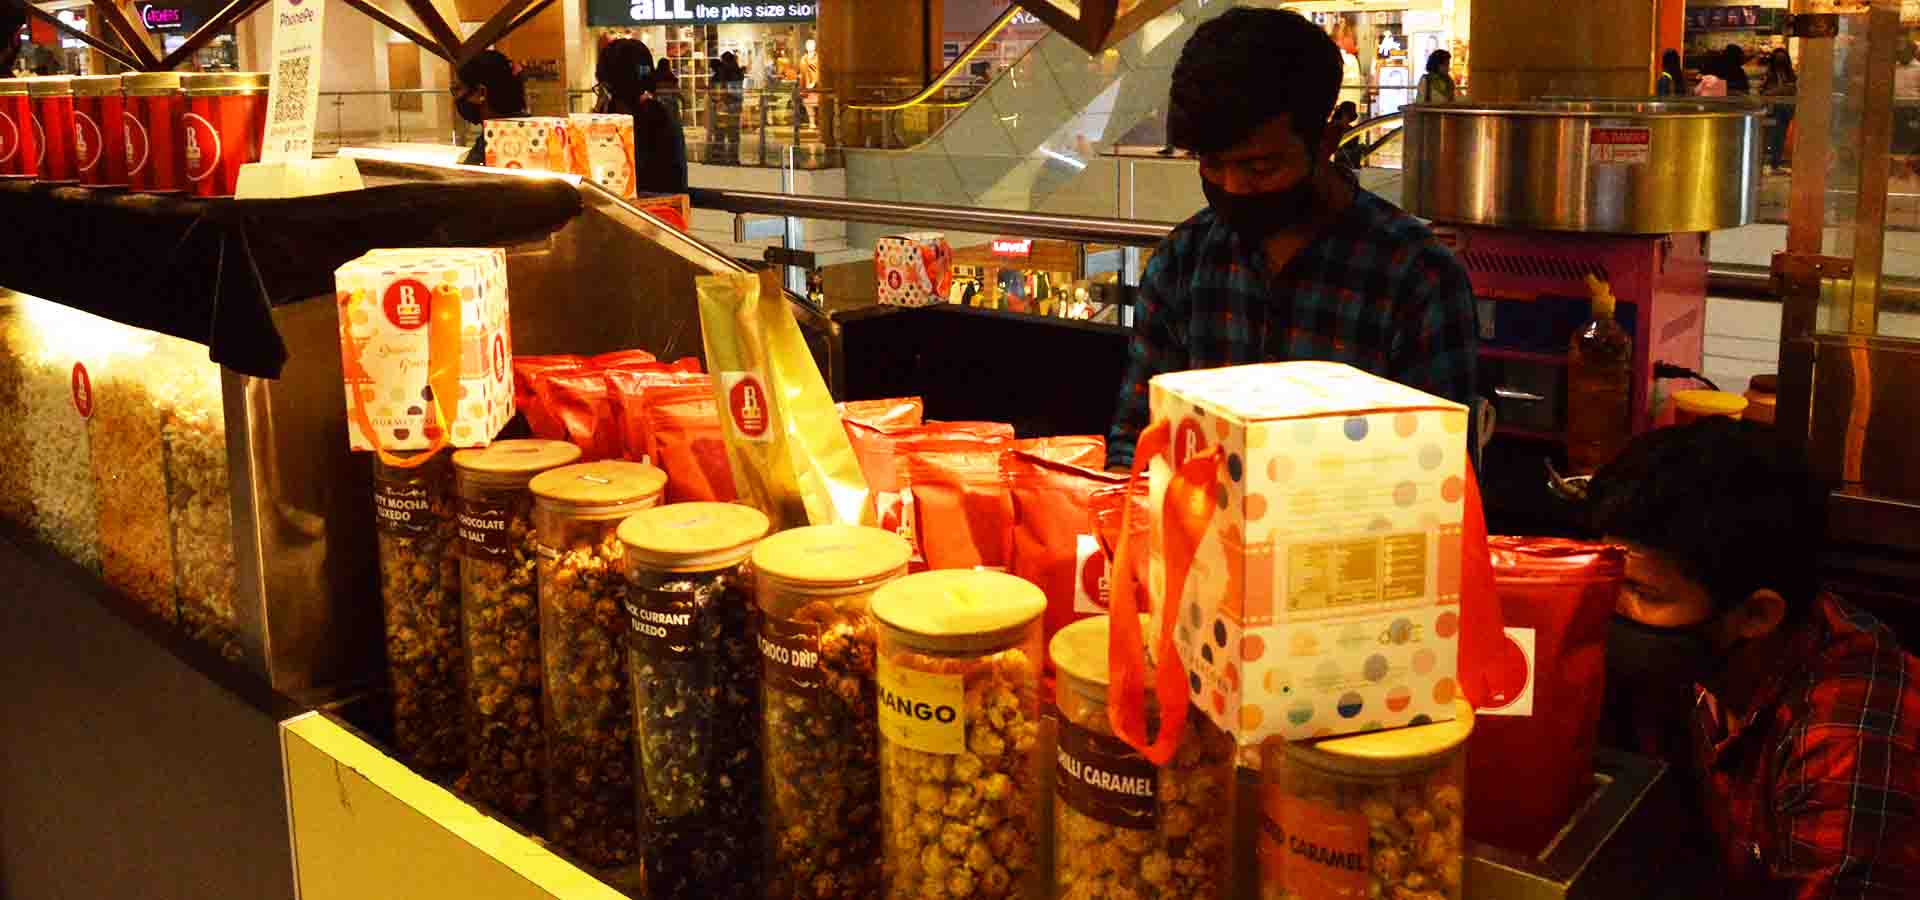 Batcaves Gourmet Popcorn store photos in mall